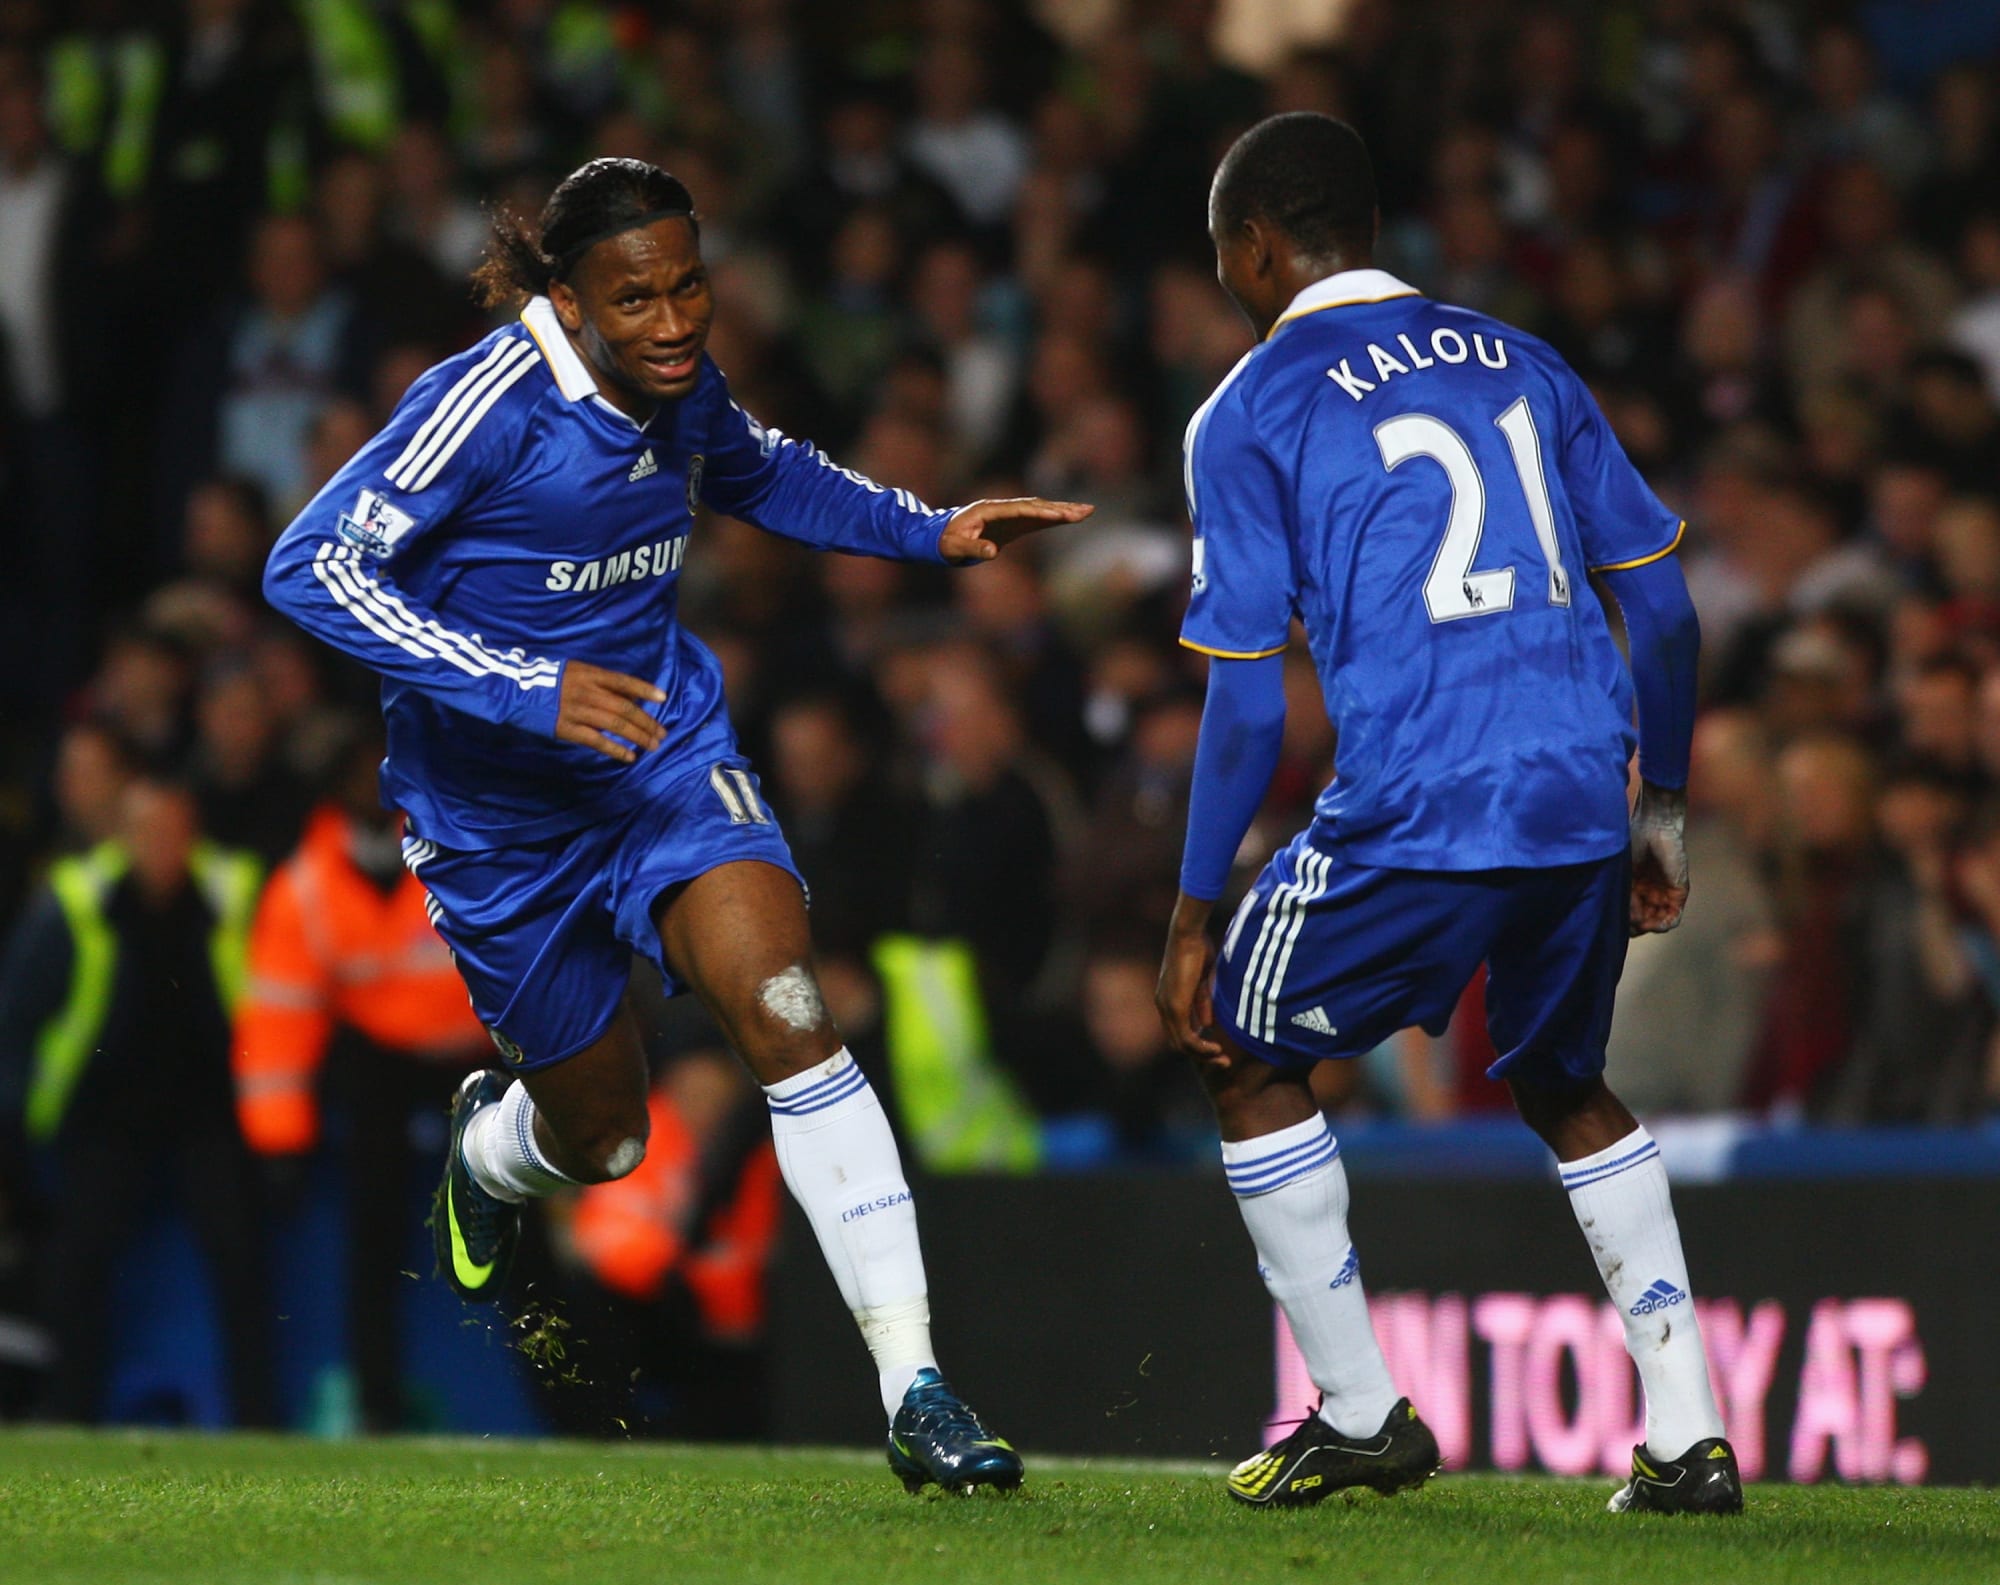 Chelsea's all-time best players from Africa: Drogba, Babayaro, Mikel - 4